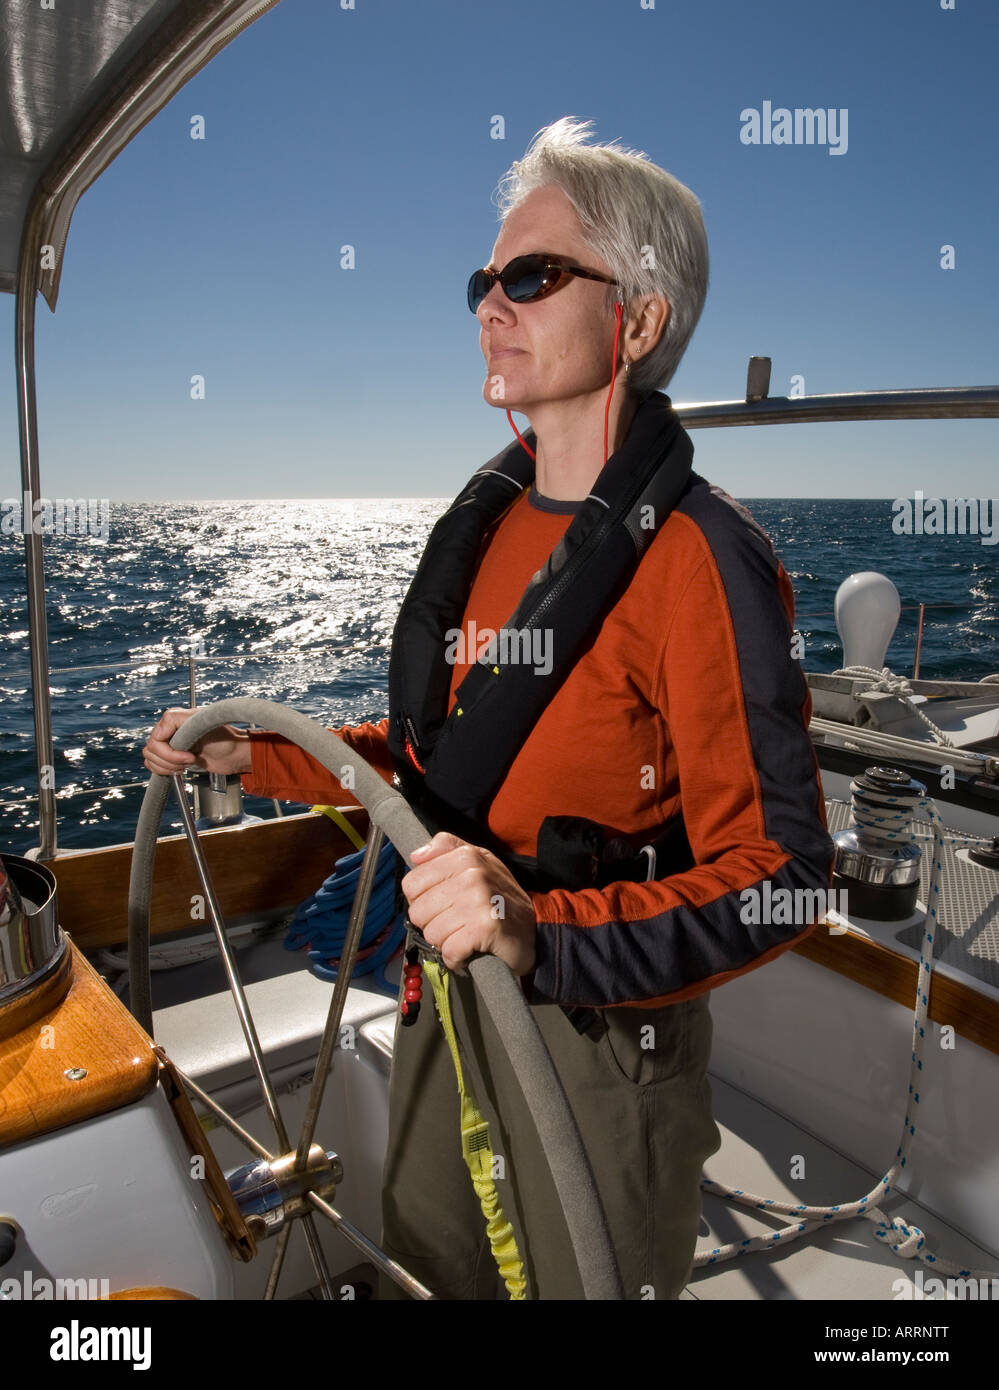 Phyllis Nickel at the helm of sailboat, Morgan's Cloud, during a sunny windy afternoon sail off Jonesport, Maine, USA. Stock Photo